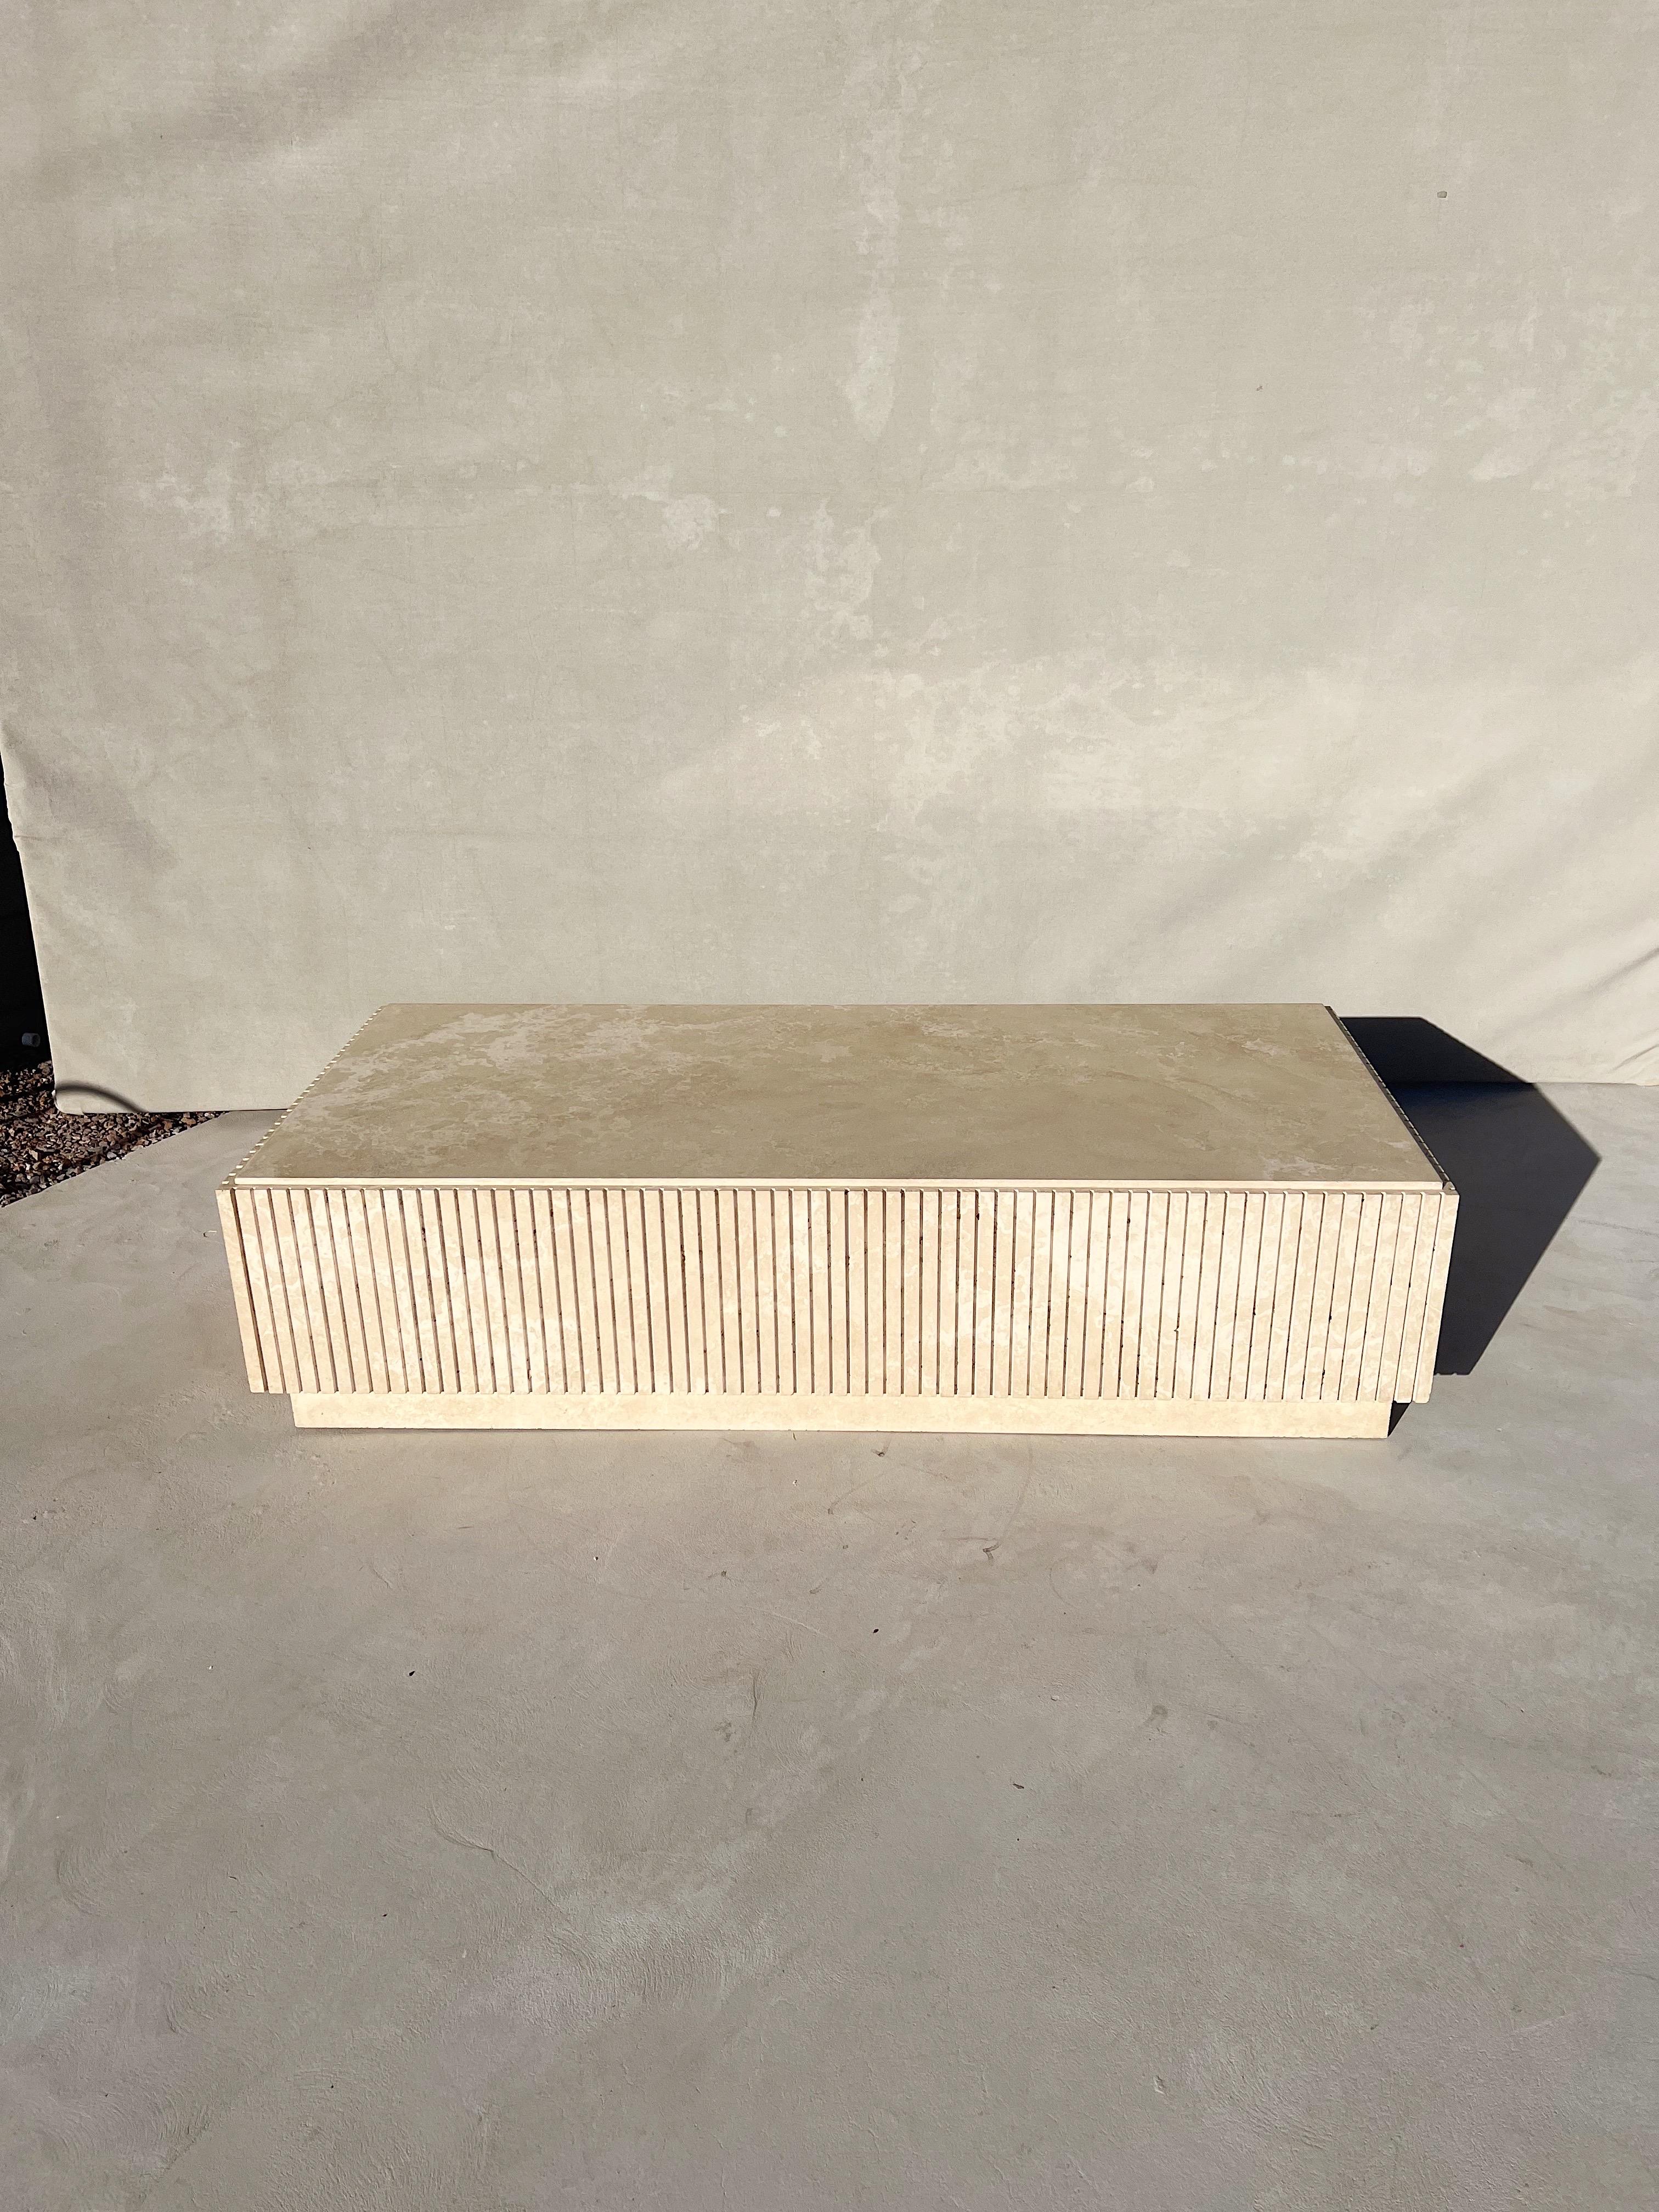 Vintage Monumental Plinth Italian travertine coffee table

An extraordinary, one of a kind, custom made, vintage Italian fluted travertine plinth coffee table

A coffee table monumental in size and elegance.

The travertine, a work of